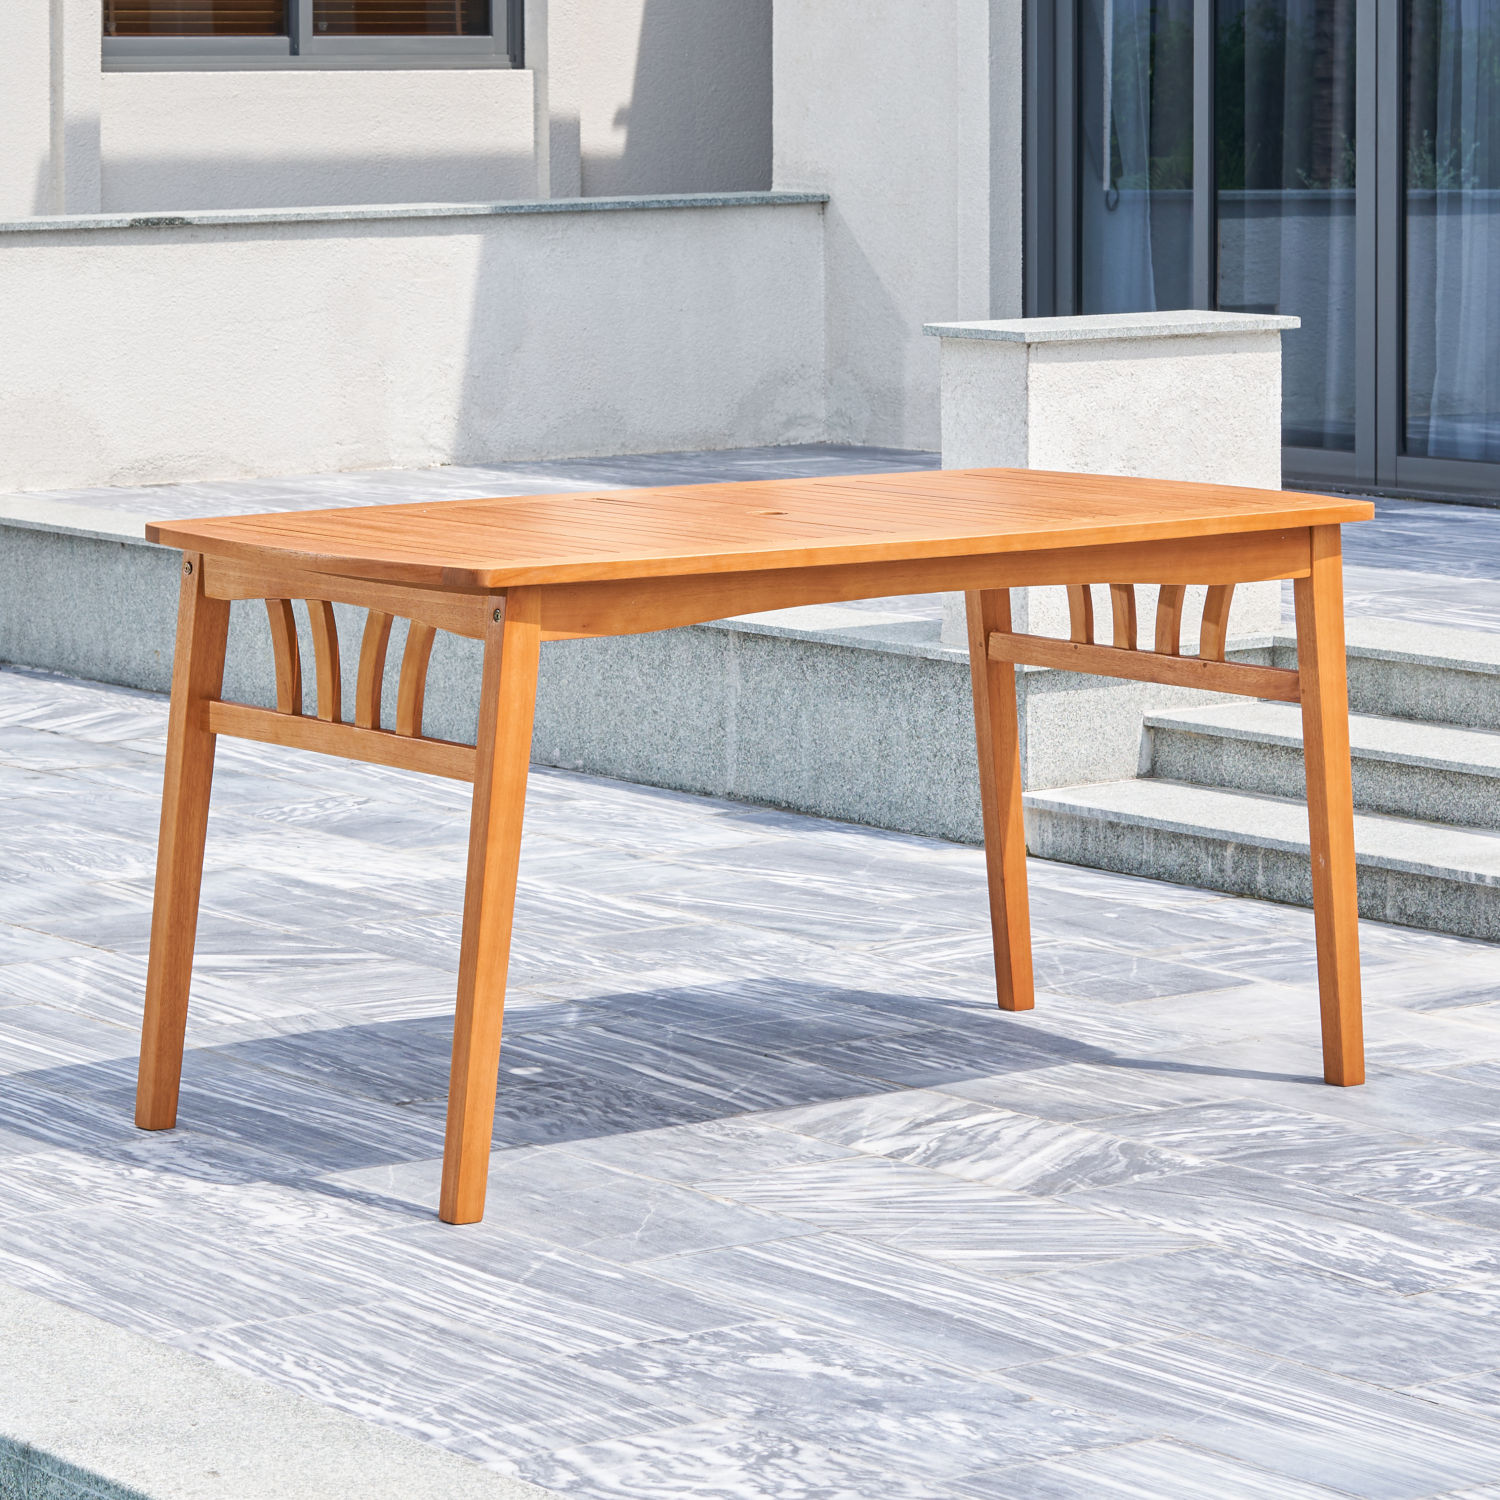 Patio Dining Tables Category